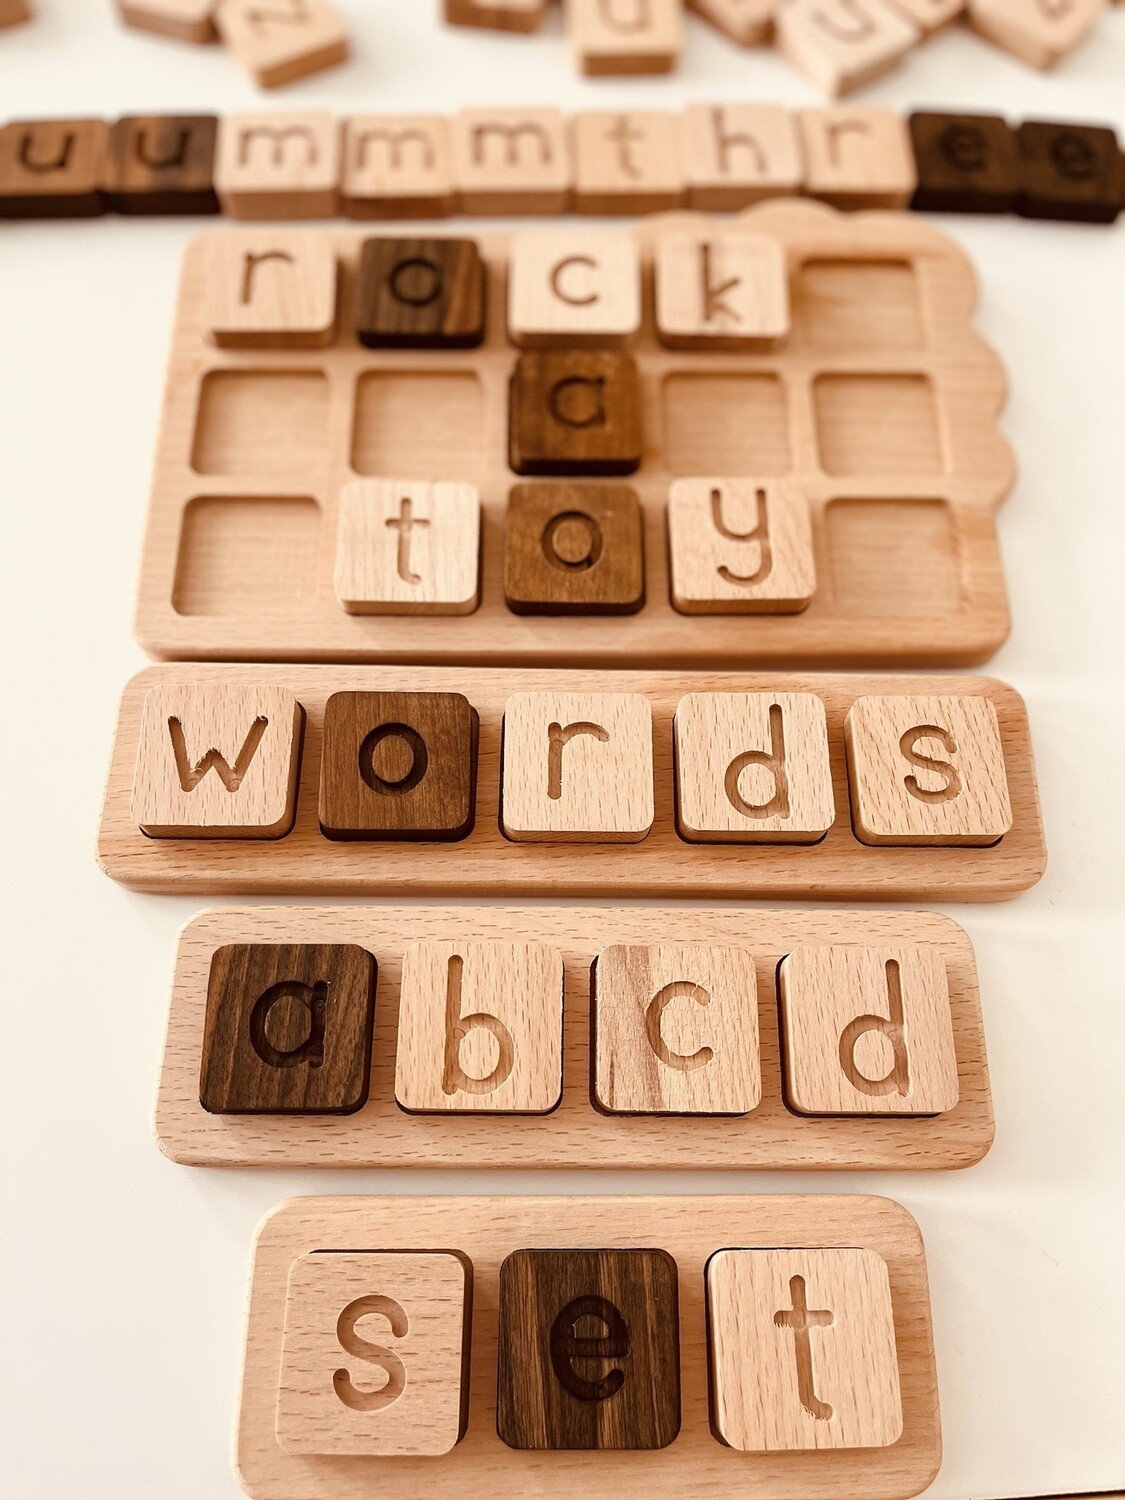 Wooden Word Building Kit